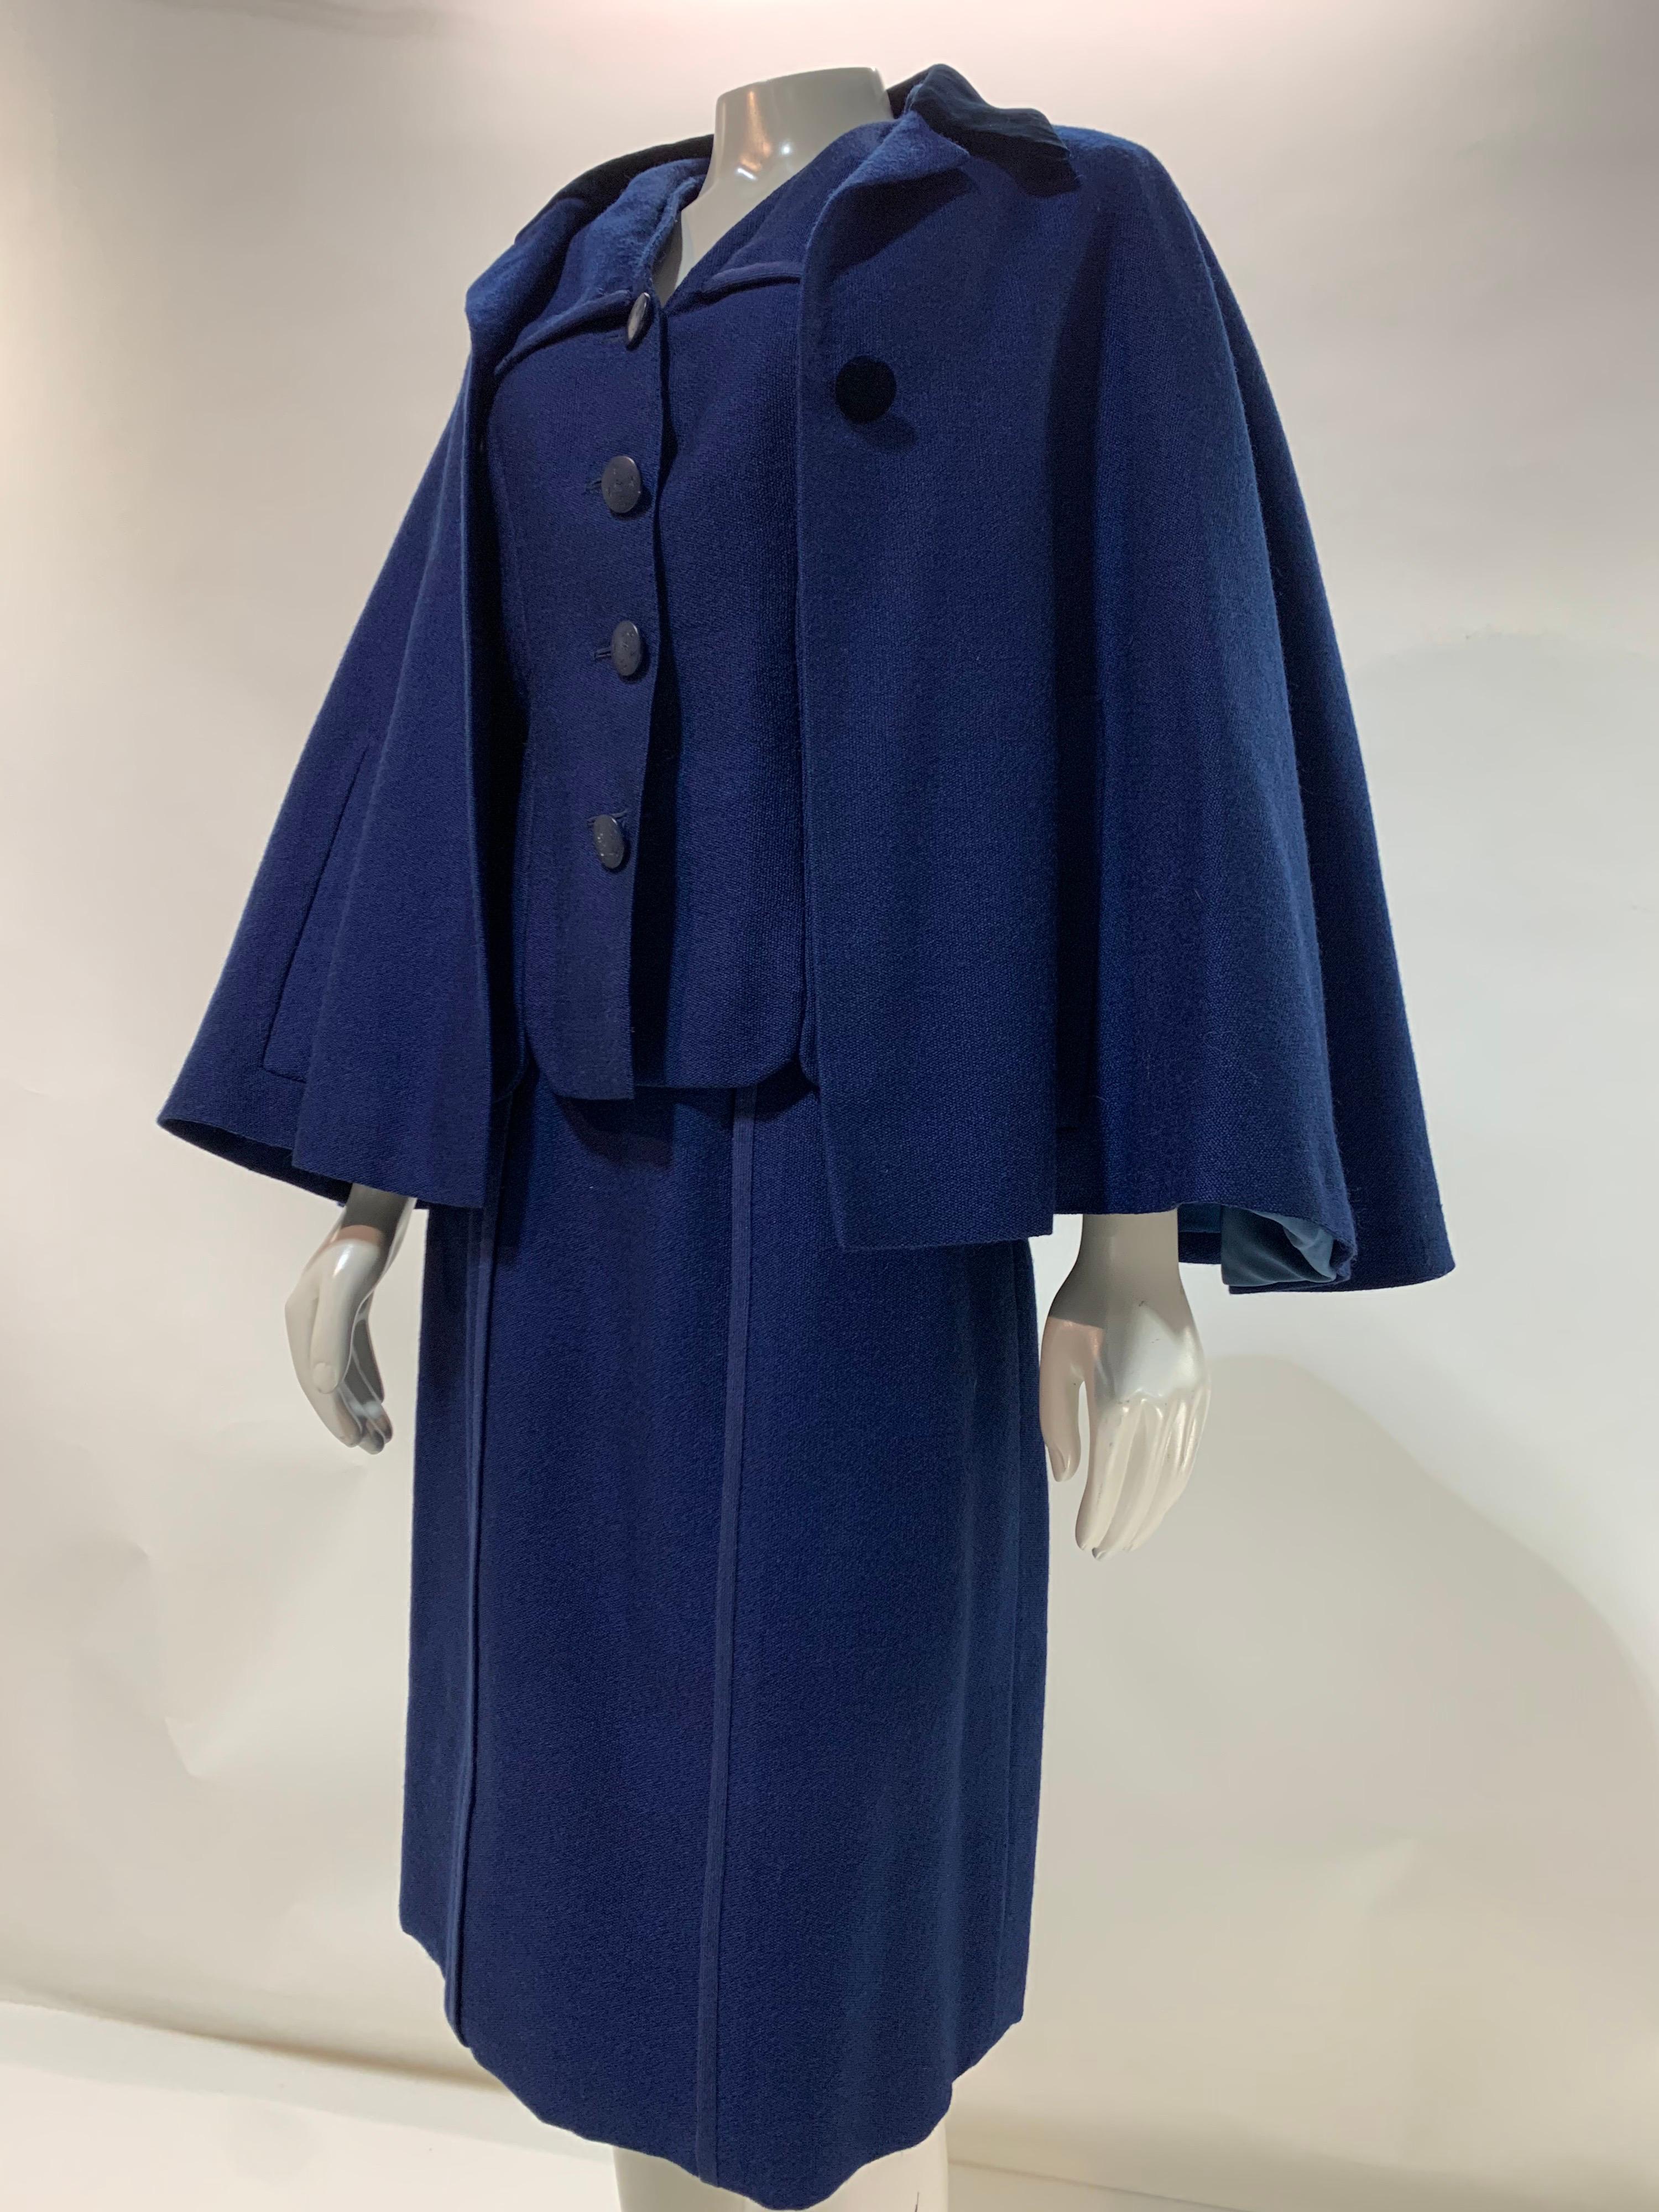 A beautifully tailored 1940s Creed of London couture 3-piece royal blue wool skirt suit with caplet. Silk crepe lined and fabulous inscribed buttons. Caplet has a velvet Chesterfield-style collar in midnight blue. Scalloped hemline on jacket. Size